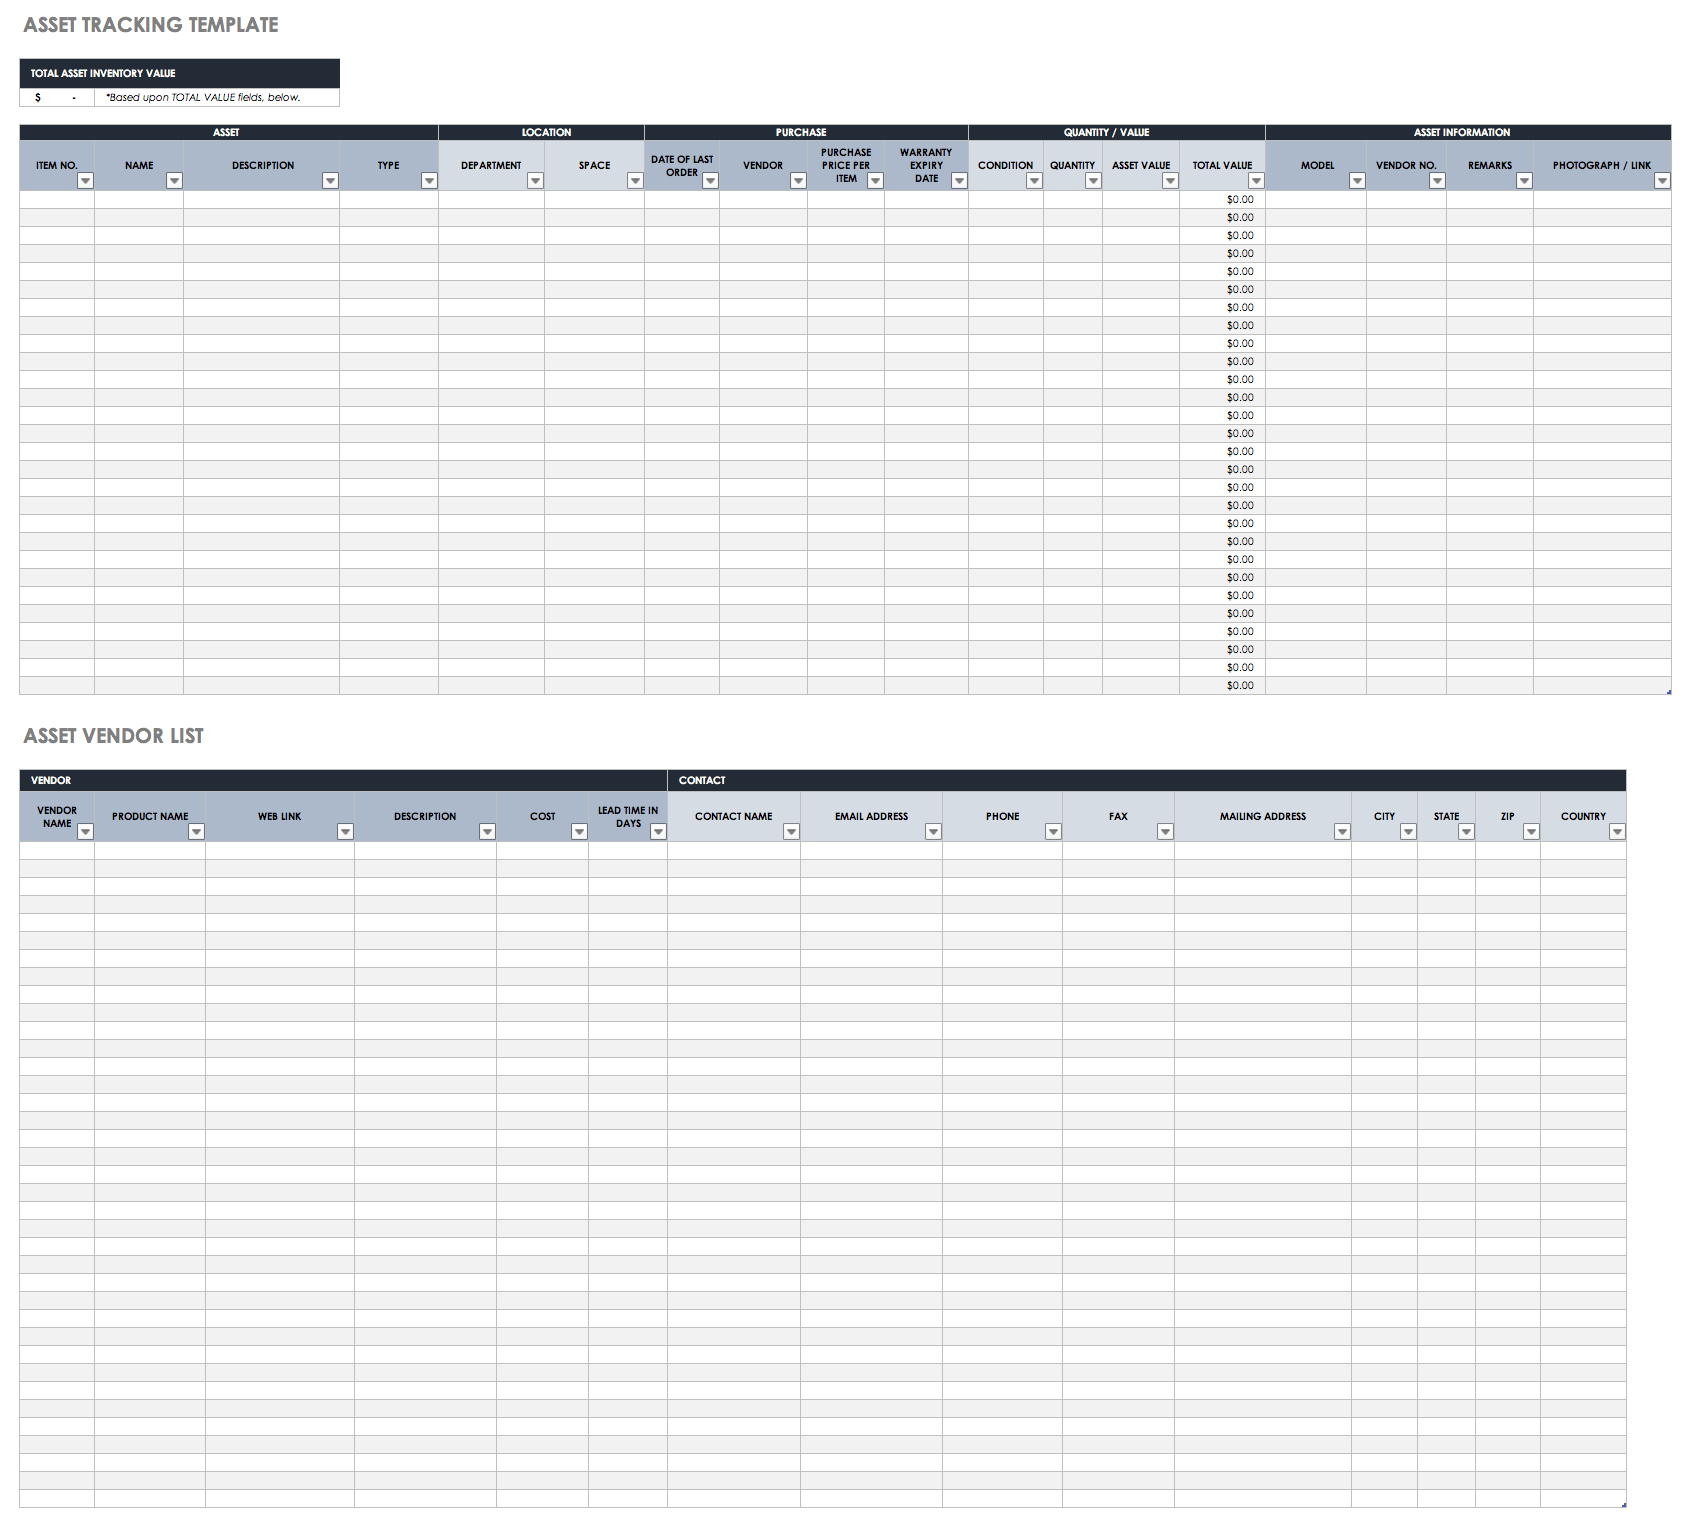 Free Excel Inventory Templates: Create & Manage | Smartsheet For Inventory Tracking Templates